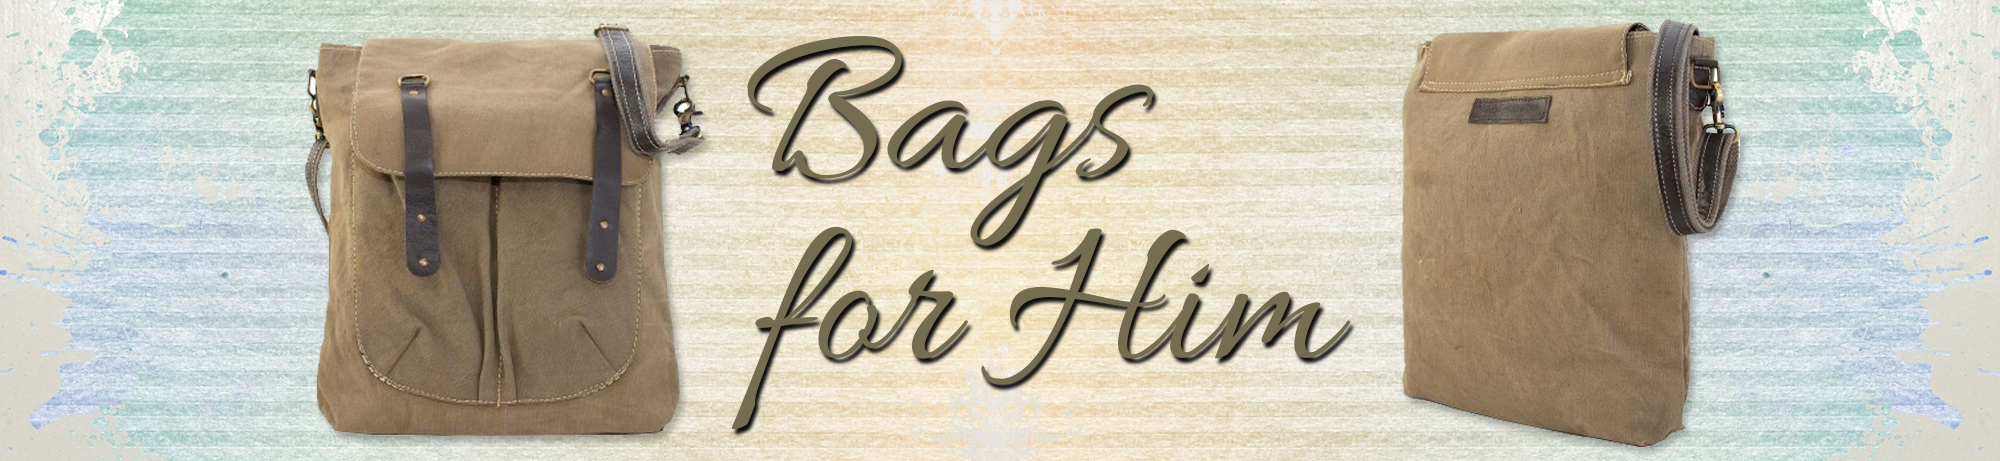 Bags for him header